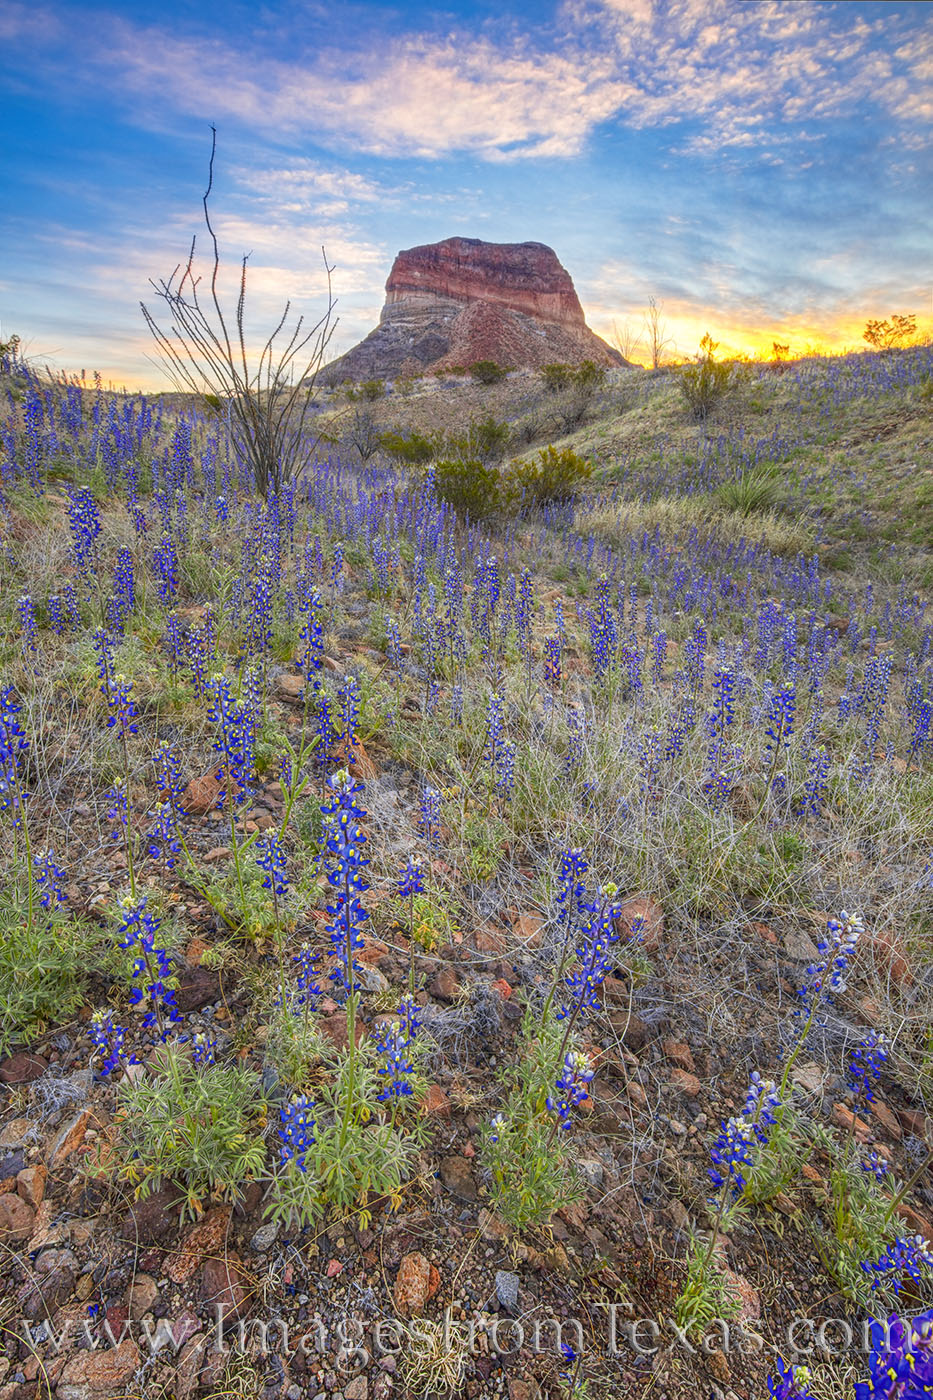 From below the famous landmark, Cerro Castellan, bluebonnets rise to meet the morning light in Big Bend National Park. This photograph...